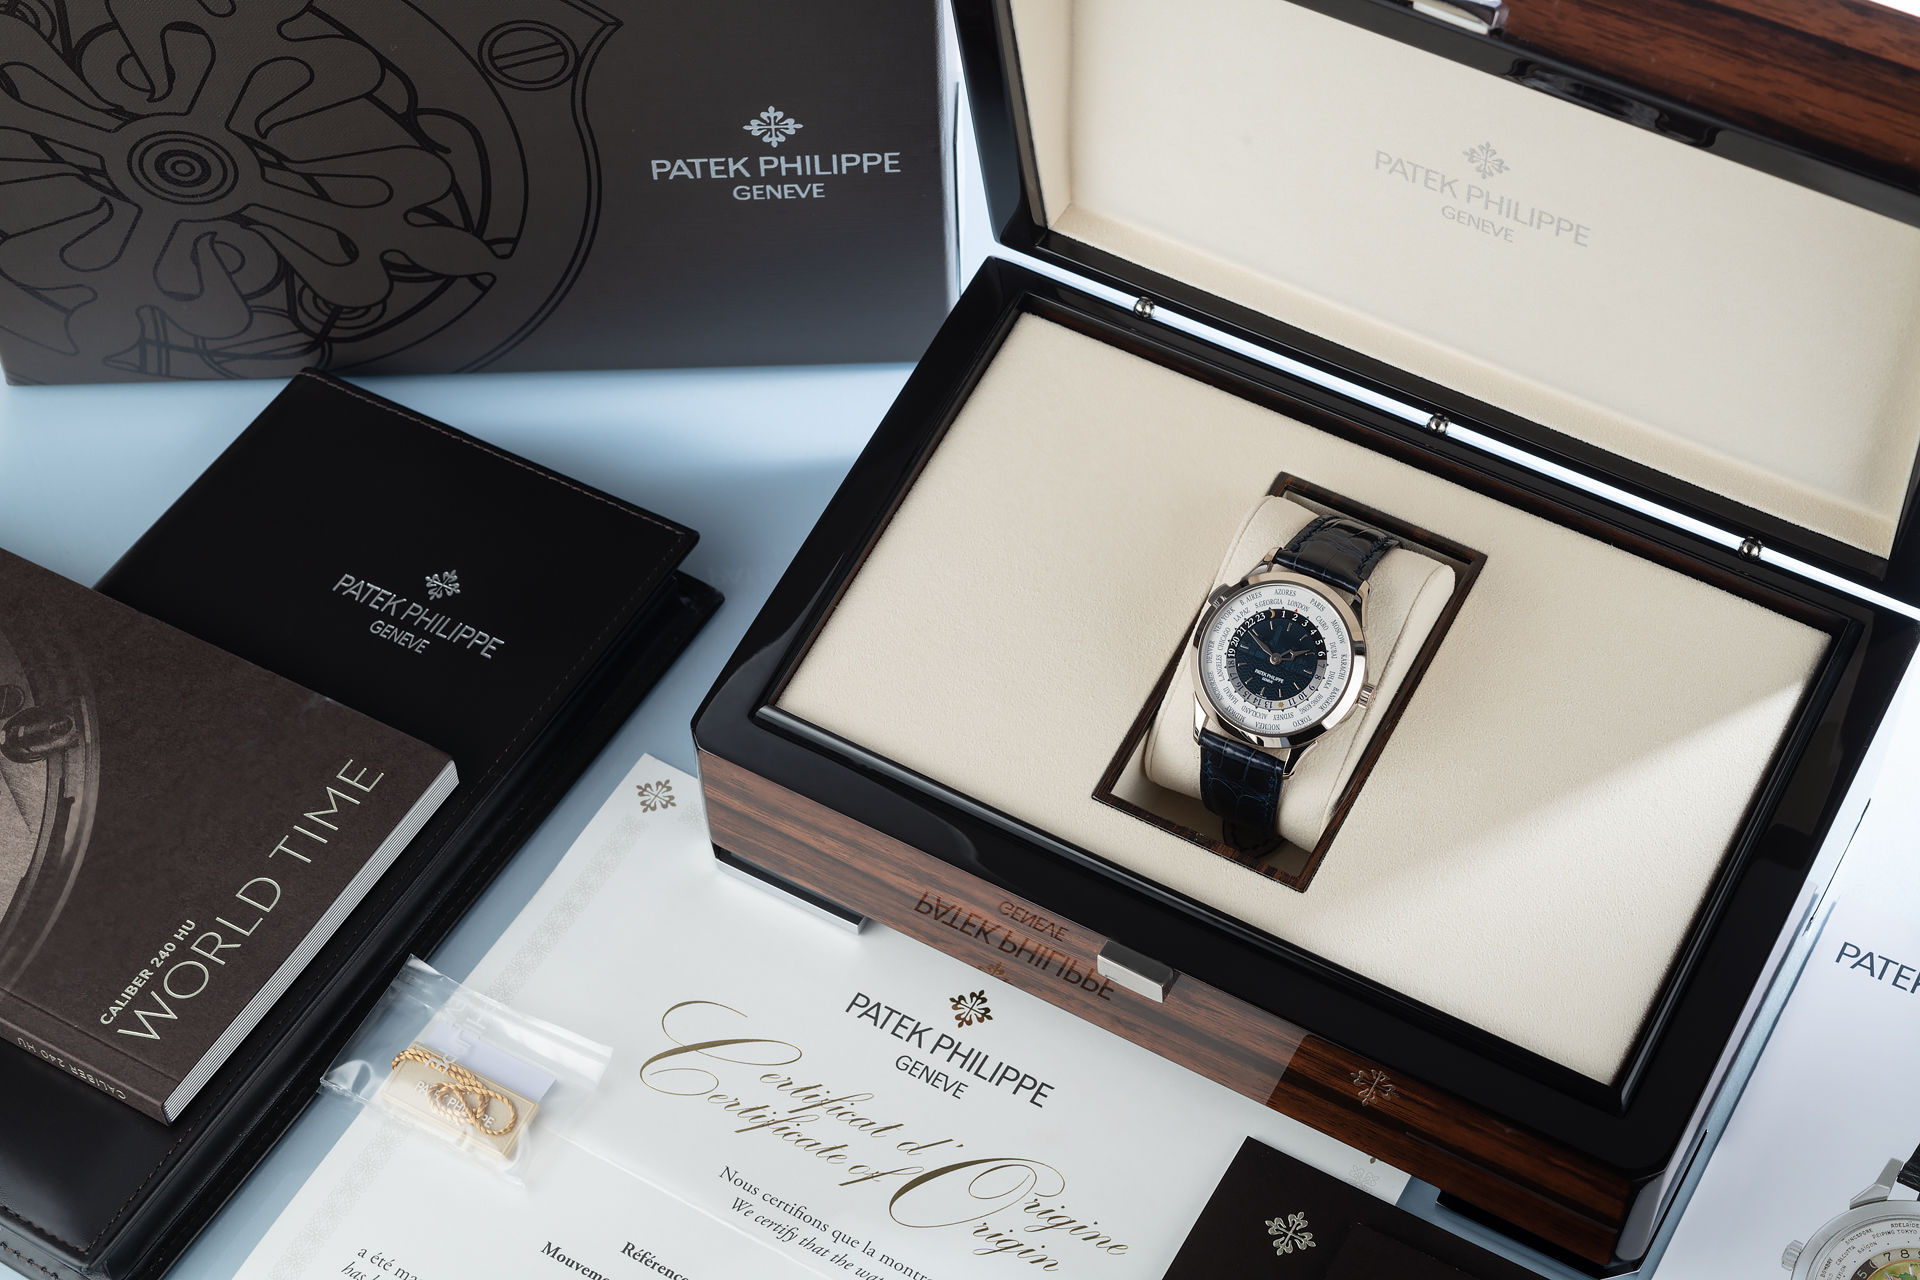 ref 5230G-010 | Limited to 300 Pieces 'Full Set' | Patek Philippe World Time